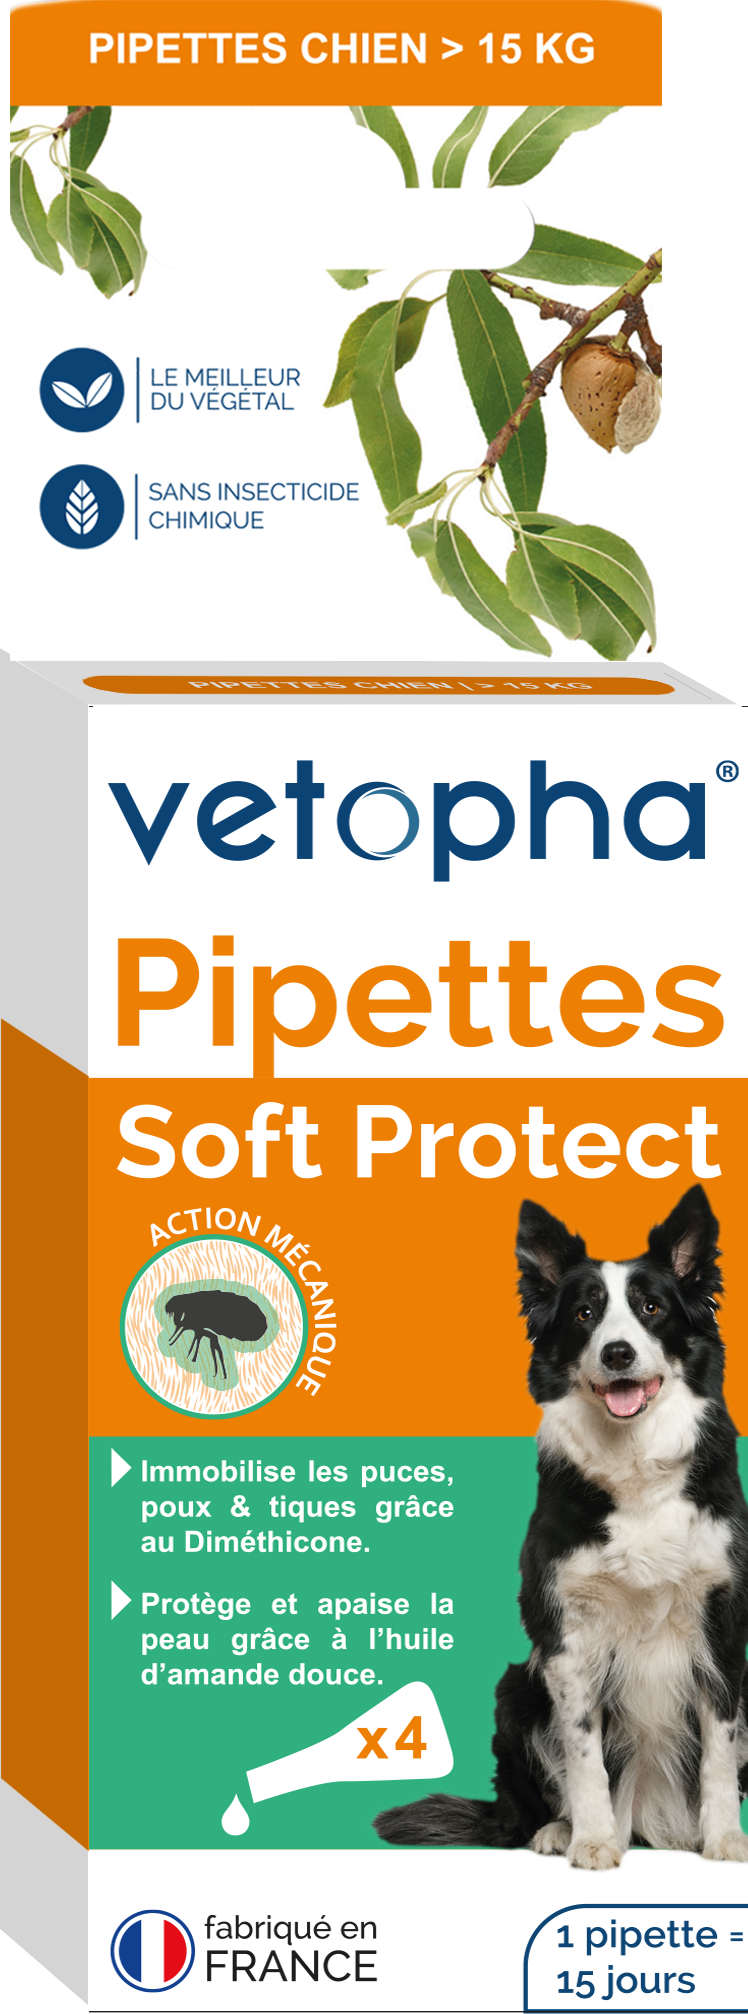 VETOPHA pipettes soft protect chien